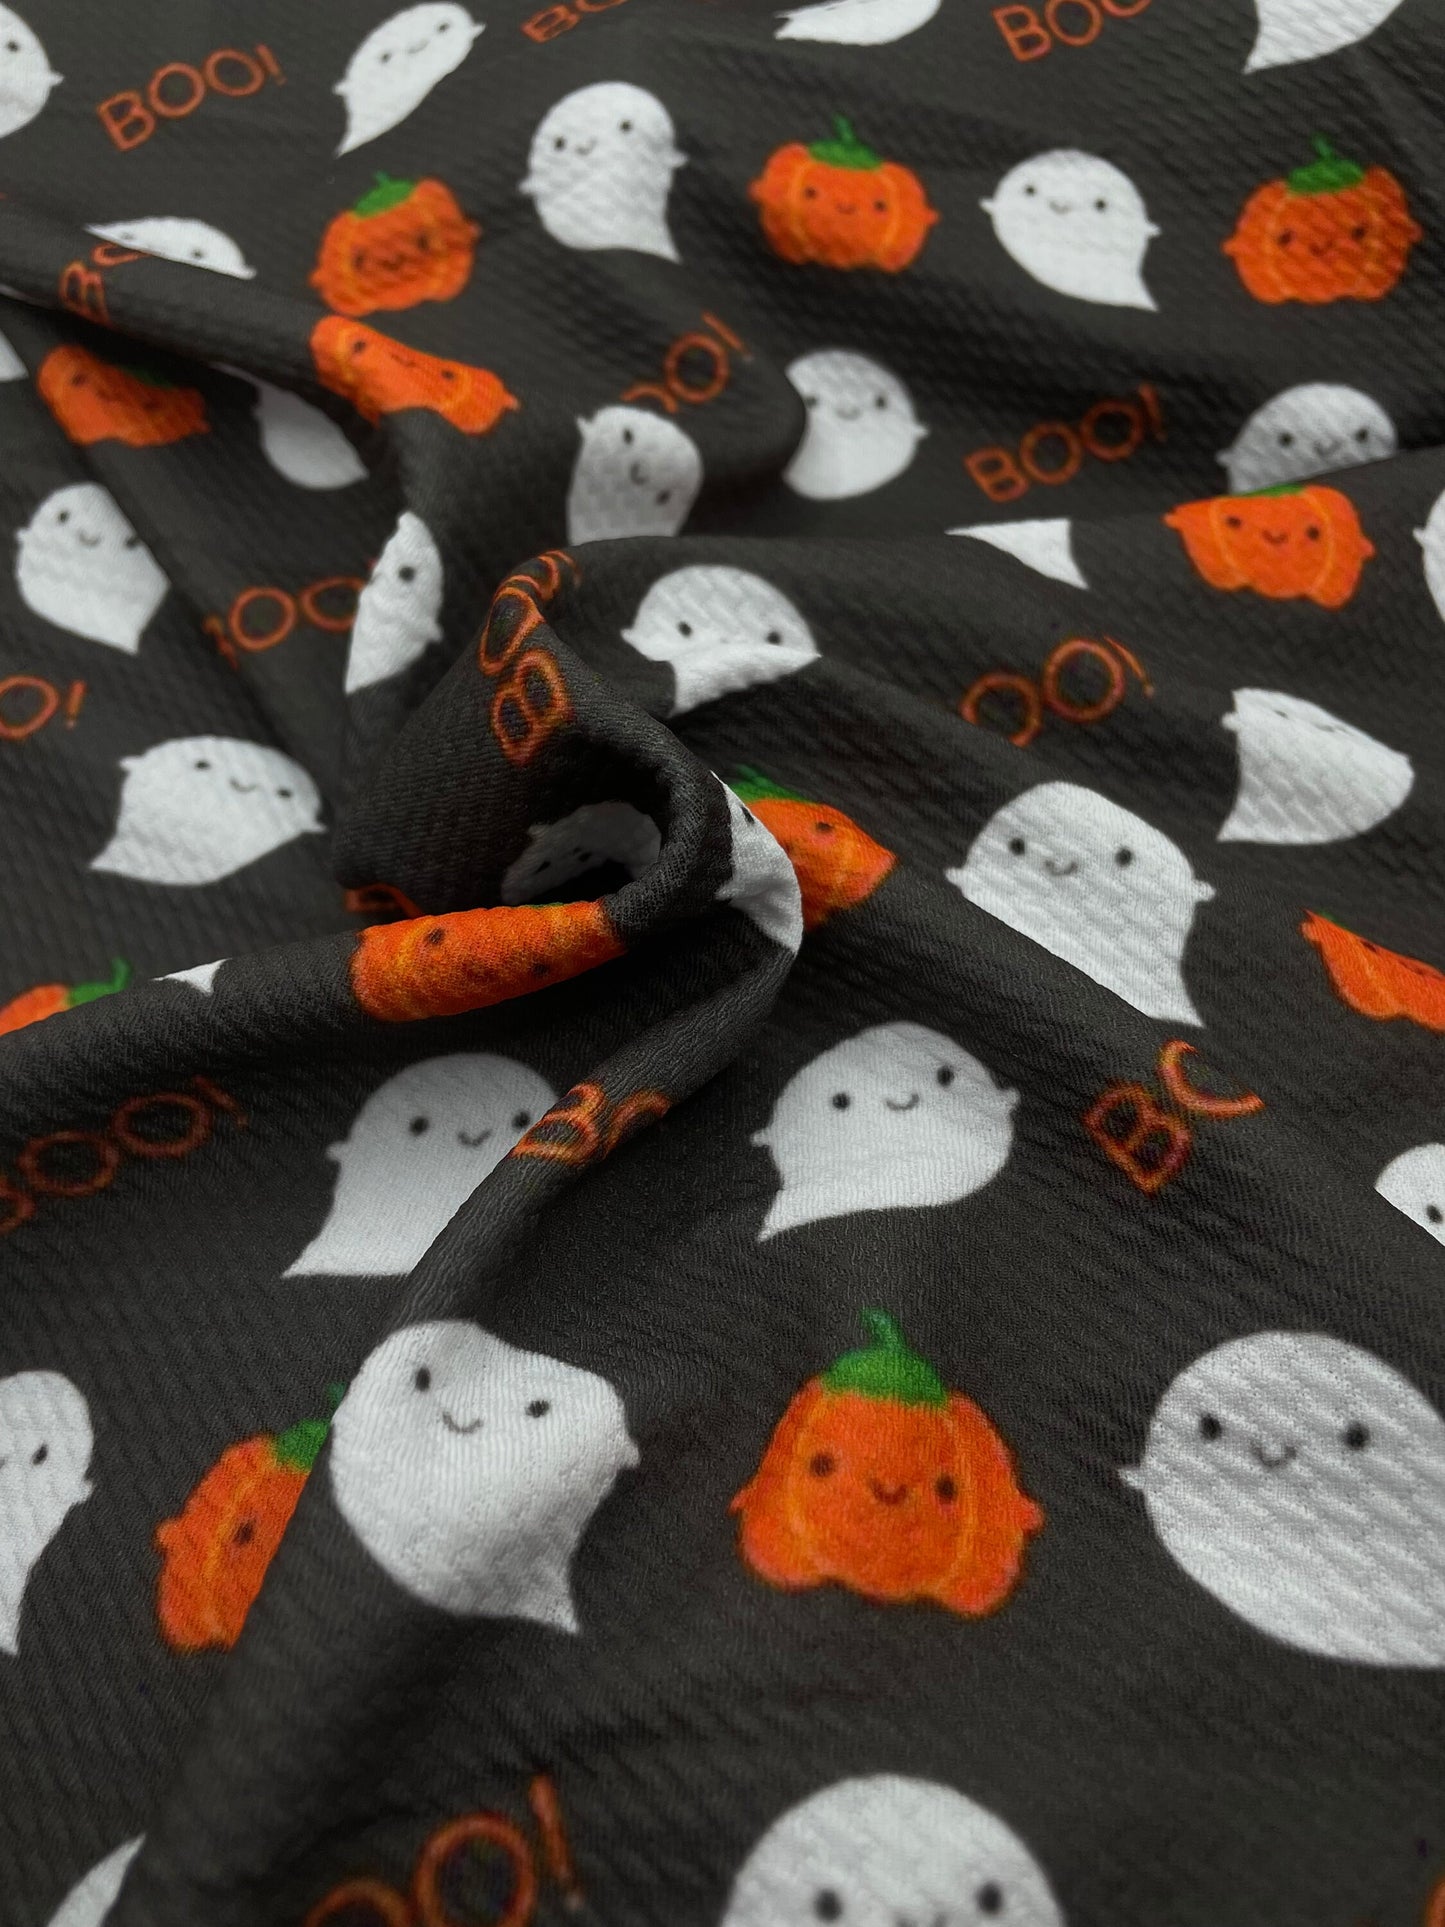 Boo Halloween Ghosts Spooky Monsters Demon Print Textured Bullet Liverpool Fabric for bows headwraps topknots headbands bow shops